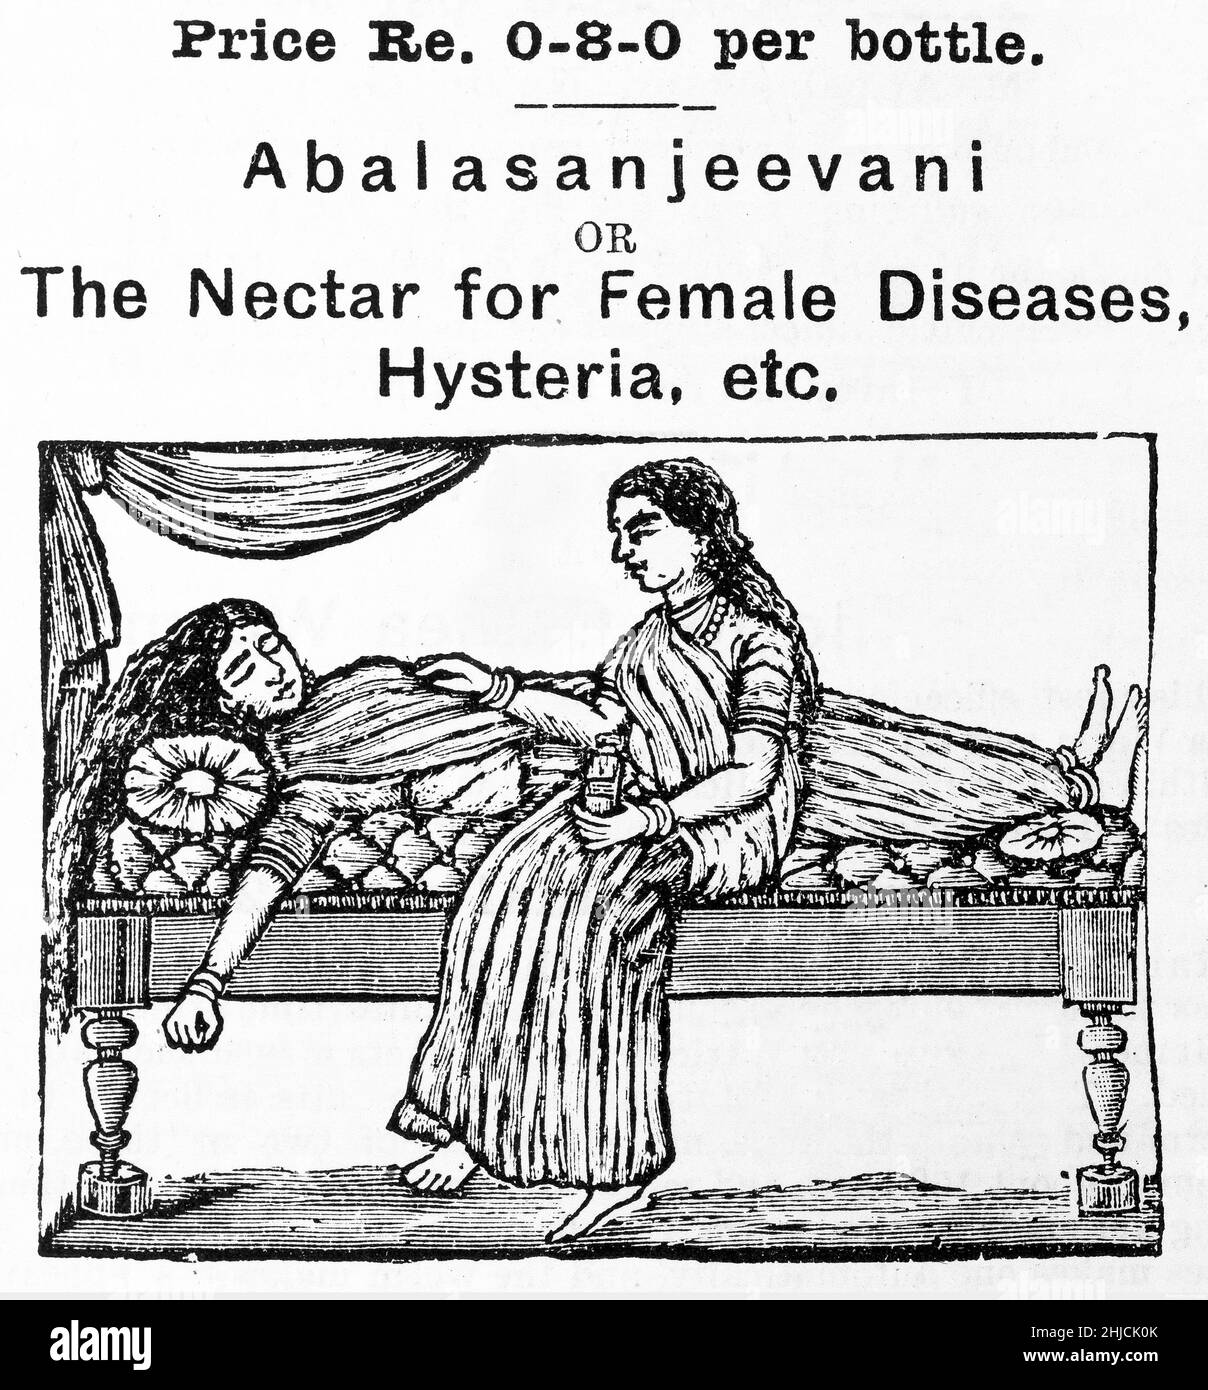 An advertisement for 'Abalasanjeevani or The Nectar for Female Diseases, Hysteria, etc.' This was a tonic created by Pandit Gopalacharlu, who was born in 1872 at Machilipatnam in India. He studied ayurveda in Mysore and in 1898 started the Ayurvedasramam to popularize ayurvedic medicine. Ayurvedic medicine is a system of Hindu traditional medicine. The oldest known Ayurvedic texts are the Susrutha Samhita and the Charaka Samhita. Stock Photo